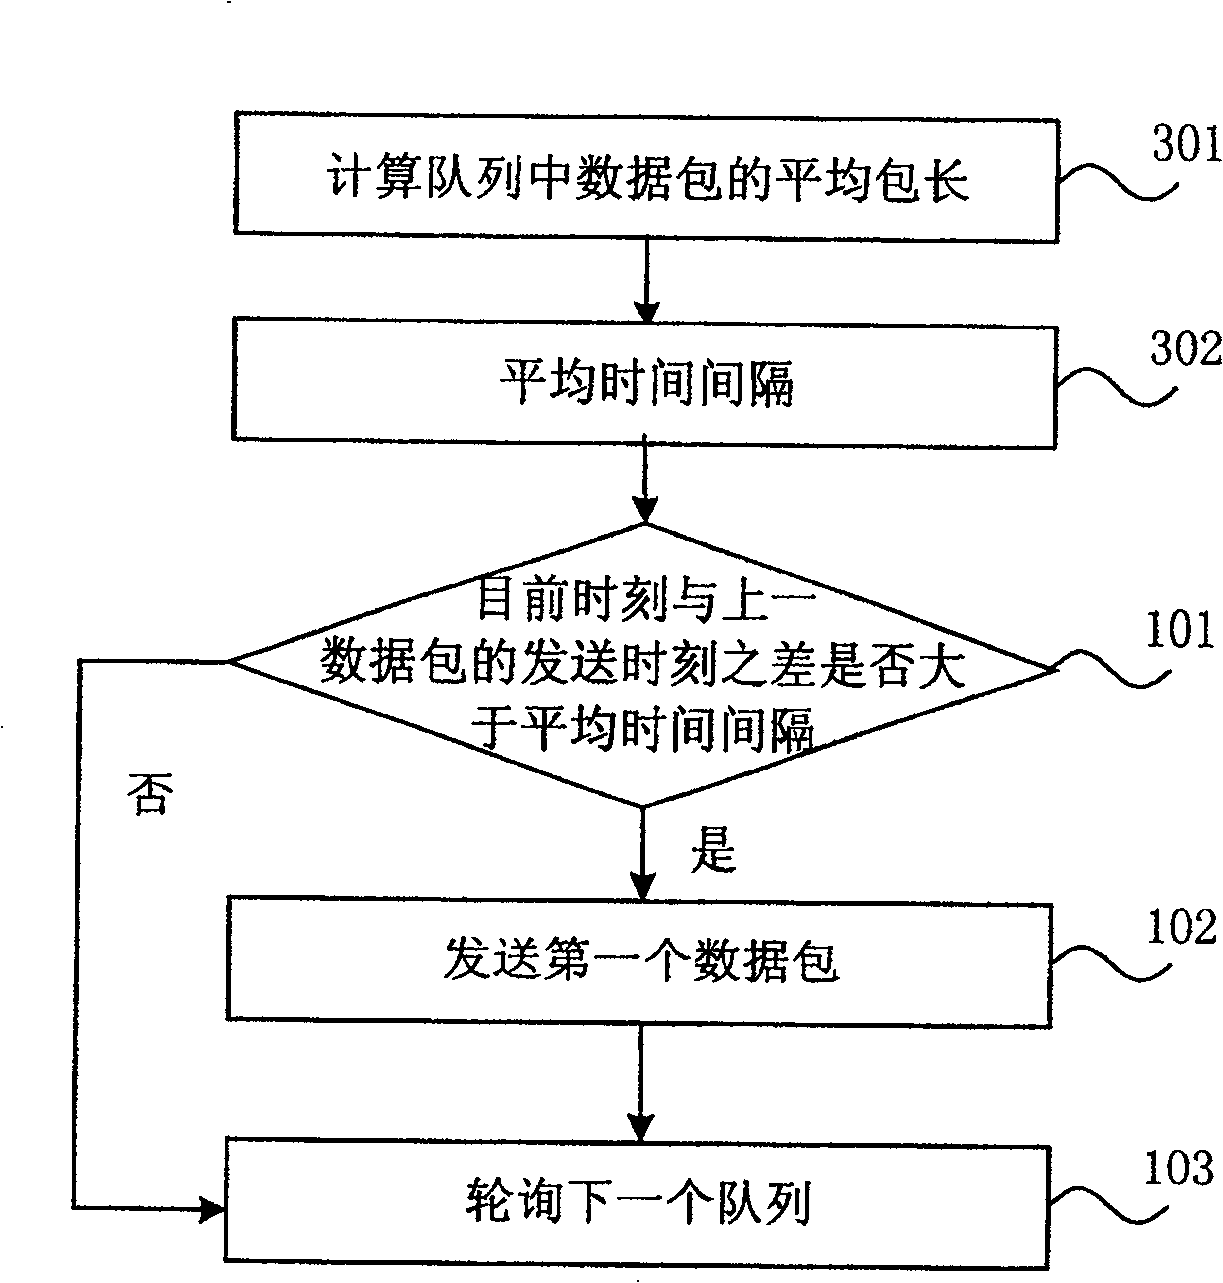 Device and method for data flux control